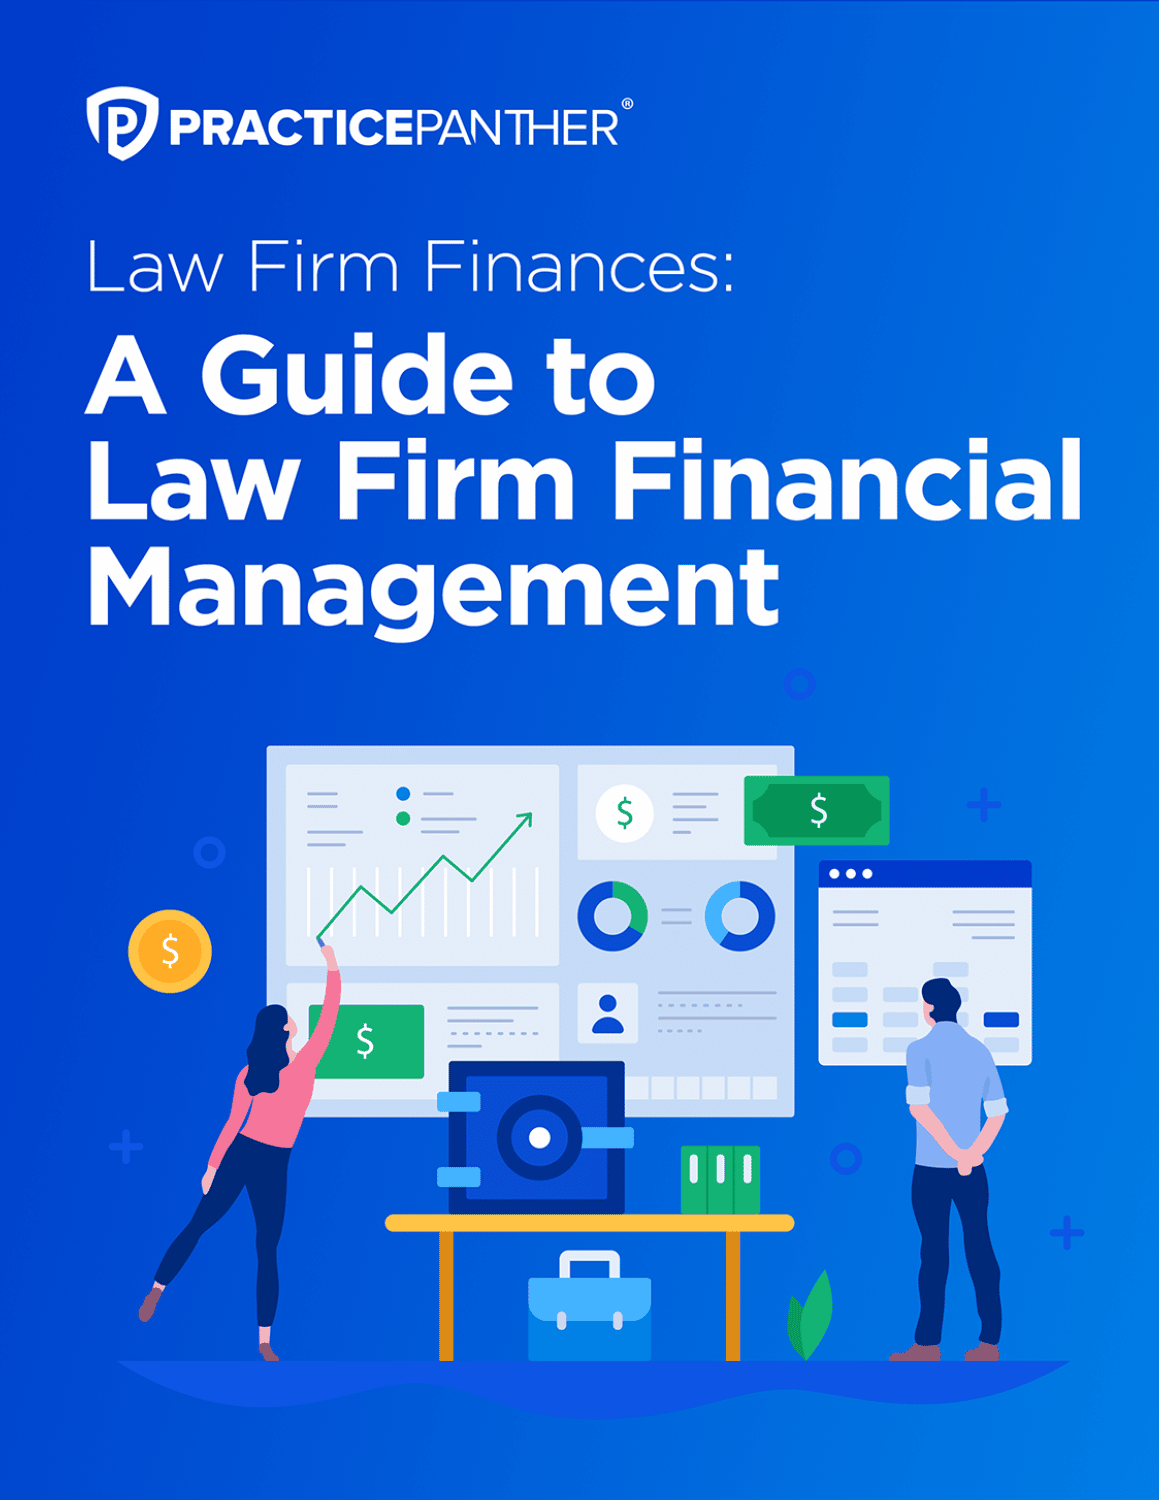 Download the Law Firm Financial Management Guide!